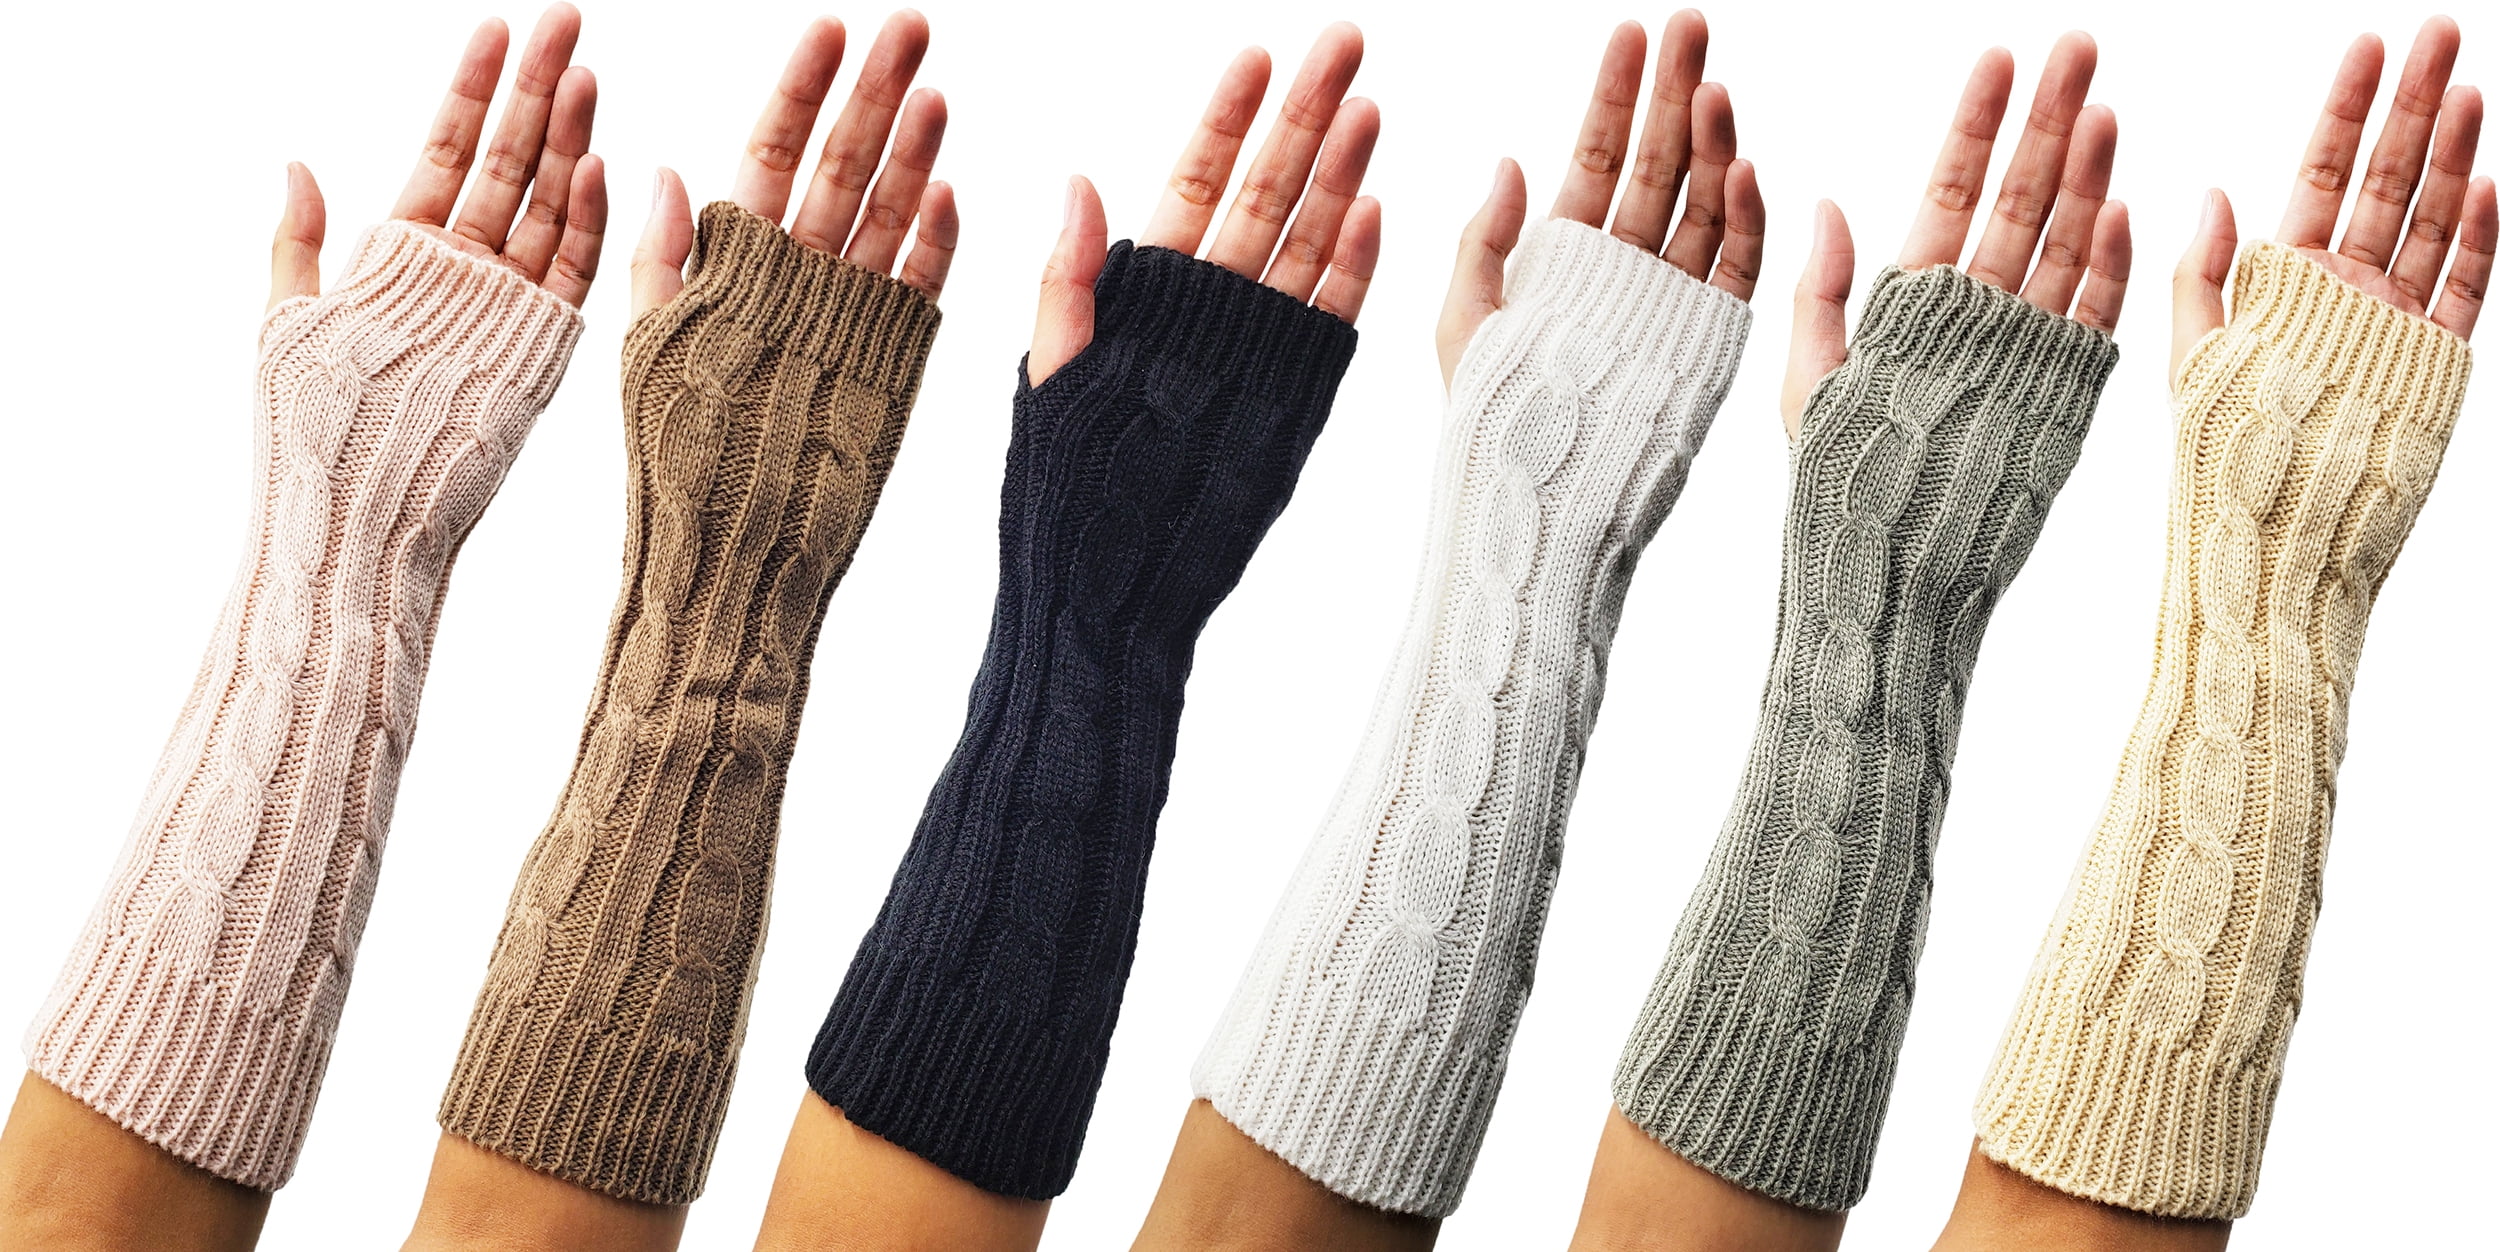 WAY.MAY Gold Stars Protection Cooling Warmer Long Arm Sleeves Sunblock Protective Fingerless Gloves Outdoor Sun Sleeve